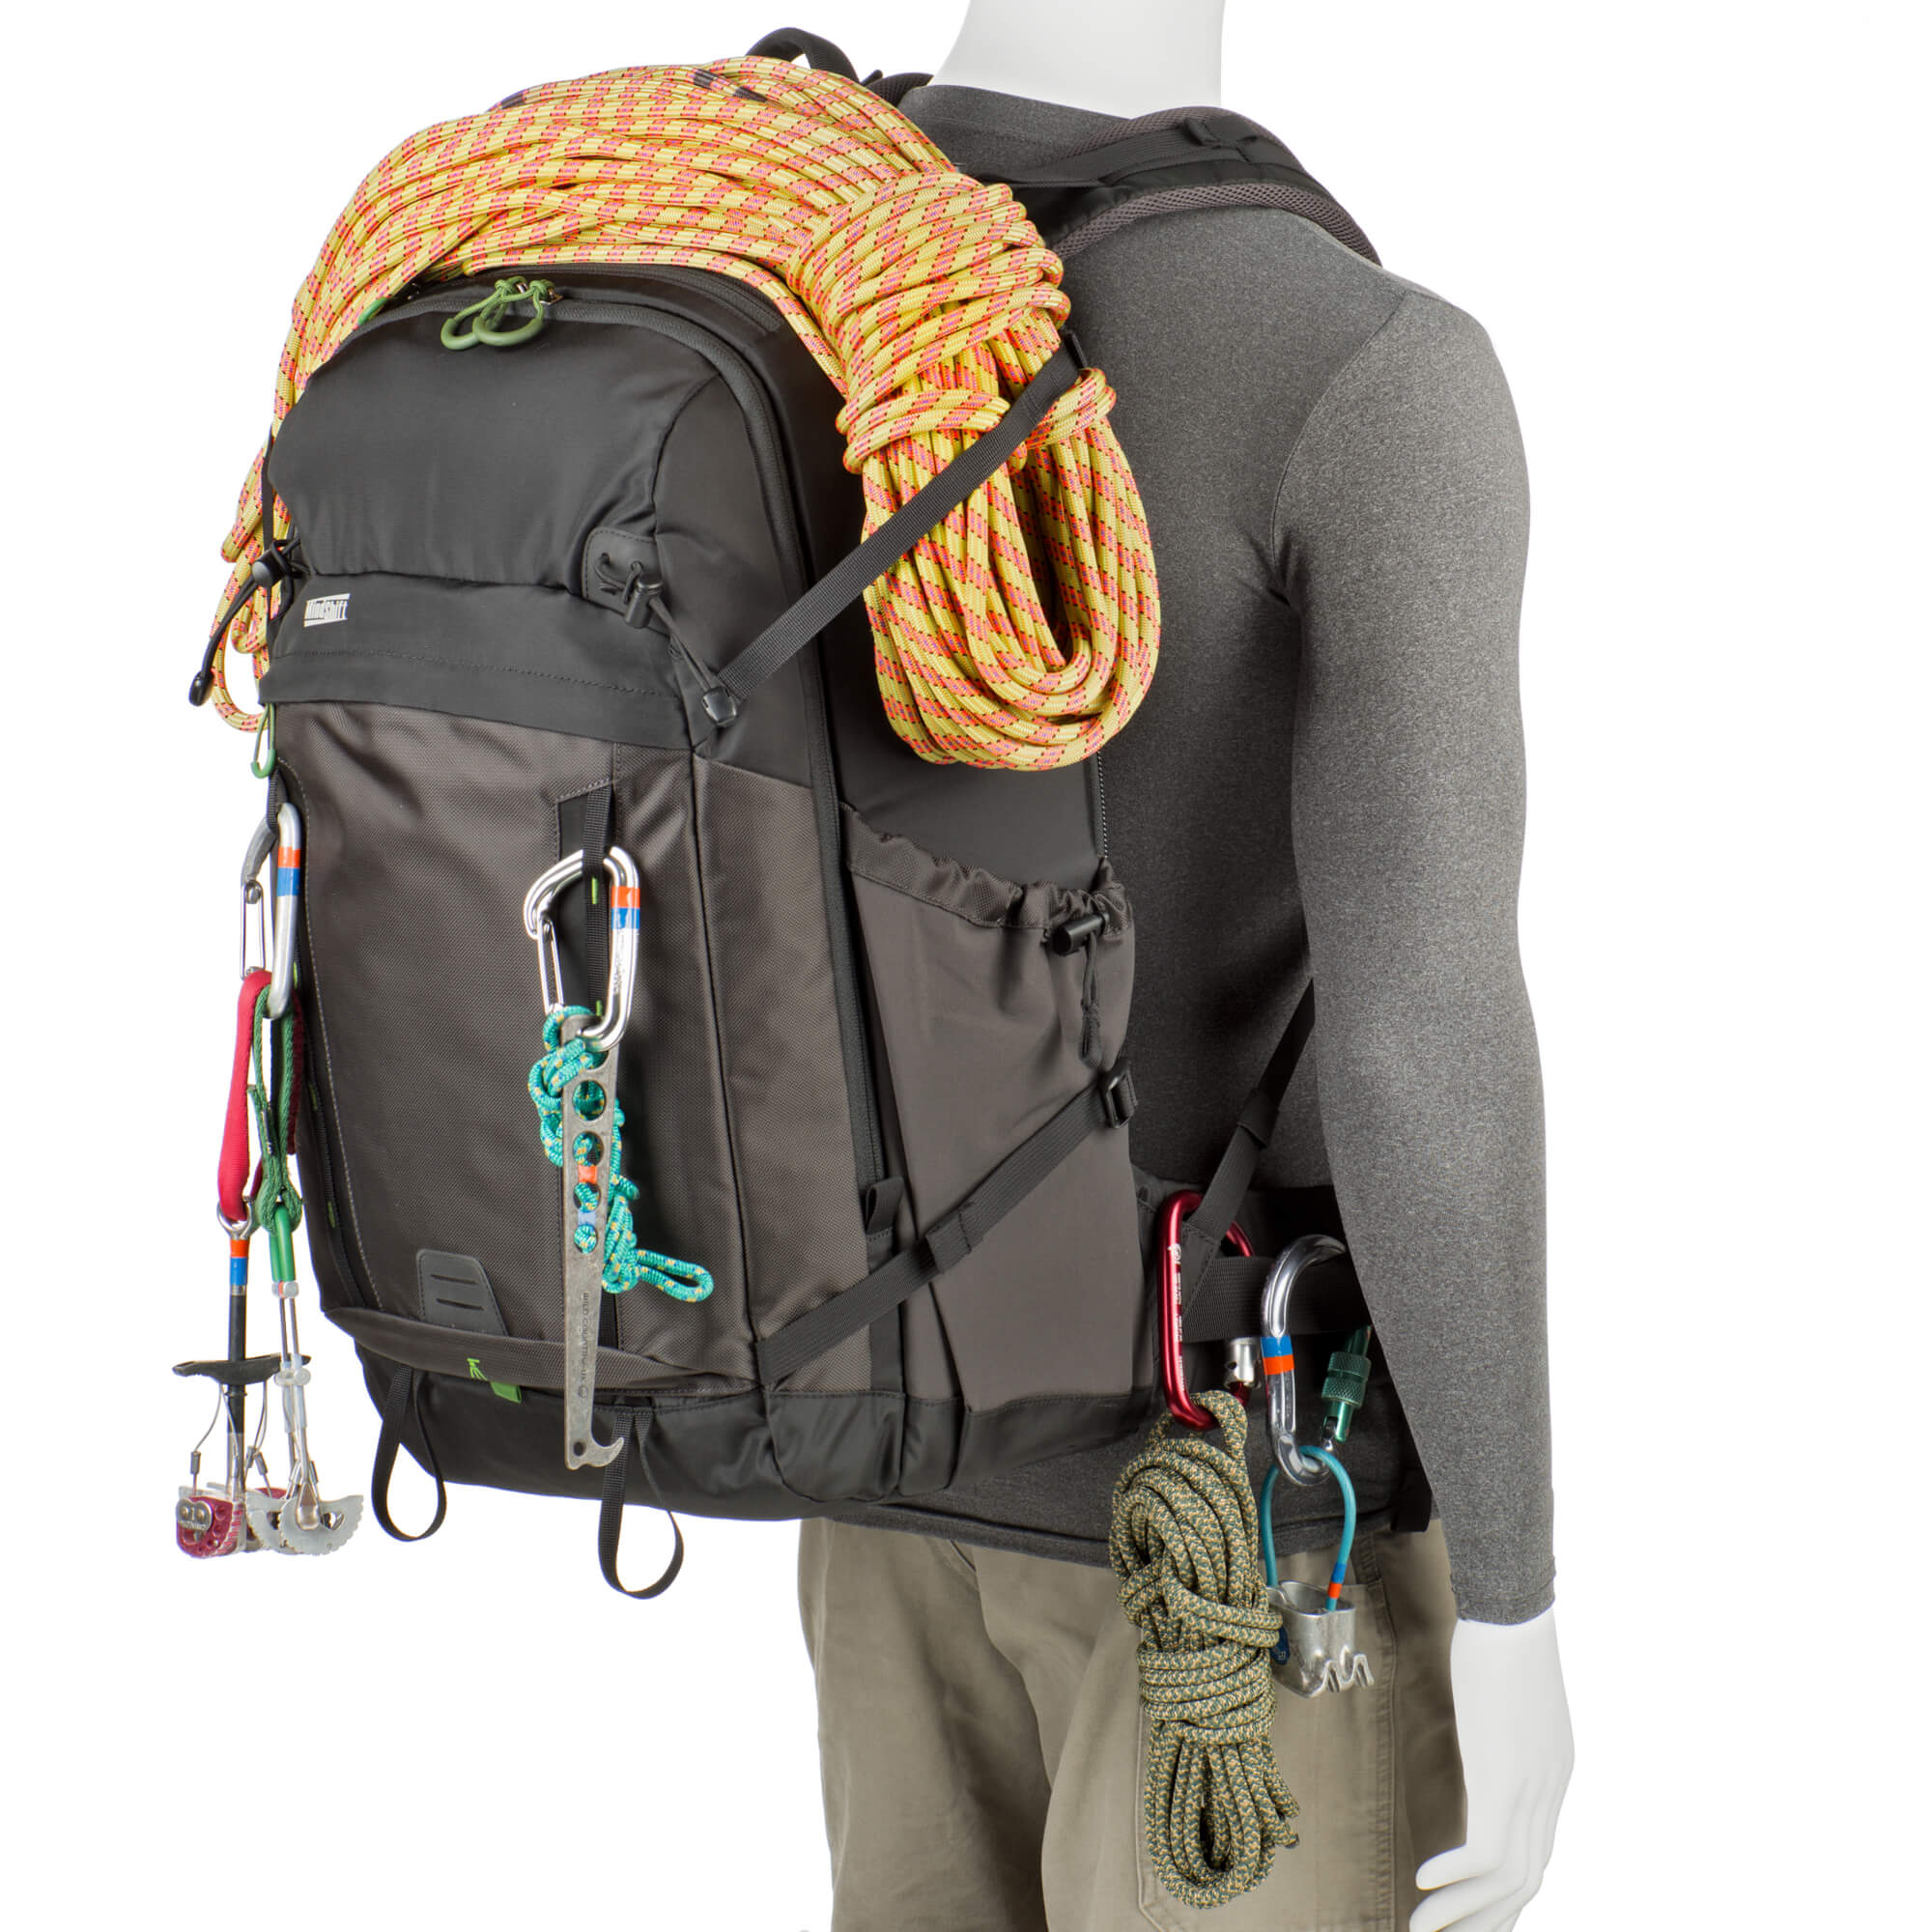 Backlight 36L Charcoal with climbing gear. Side compression straps with locking SR buckles for additional lash points